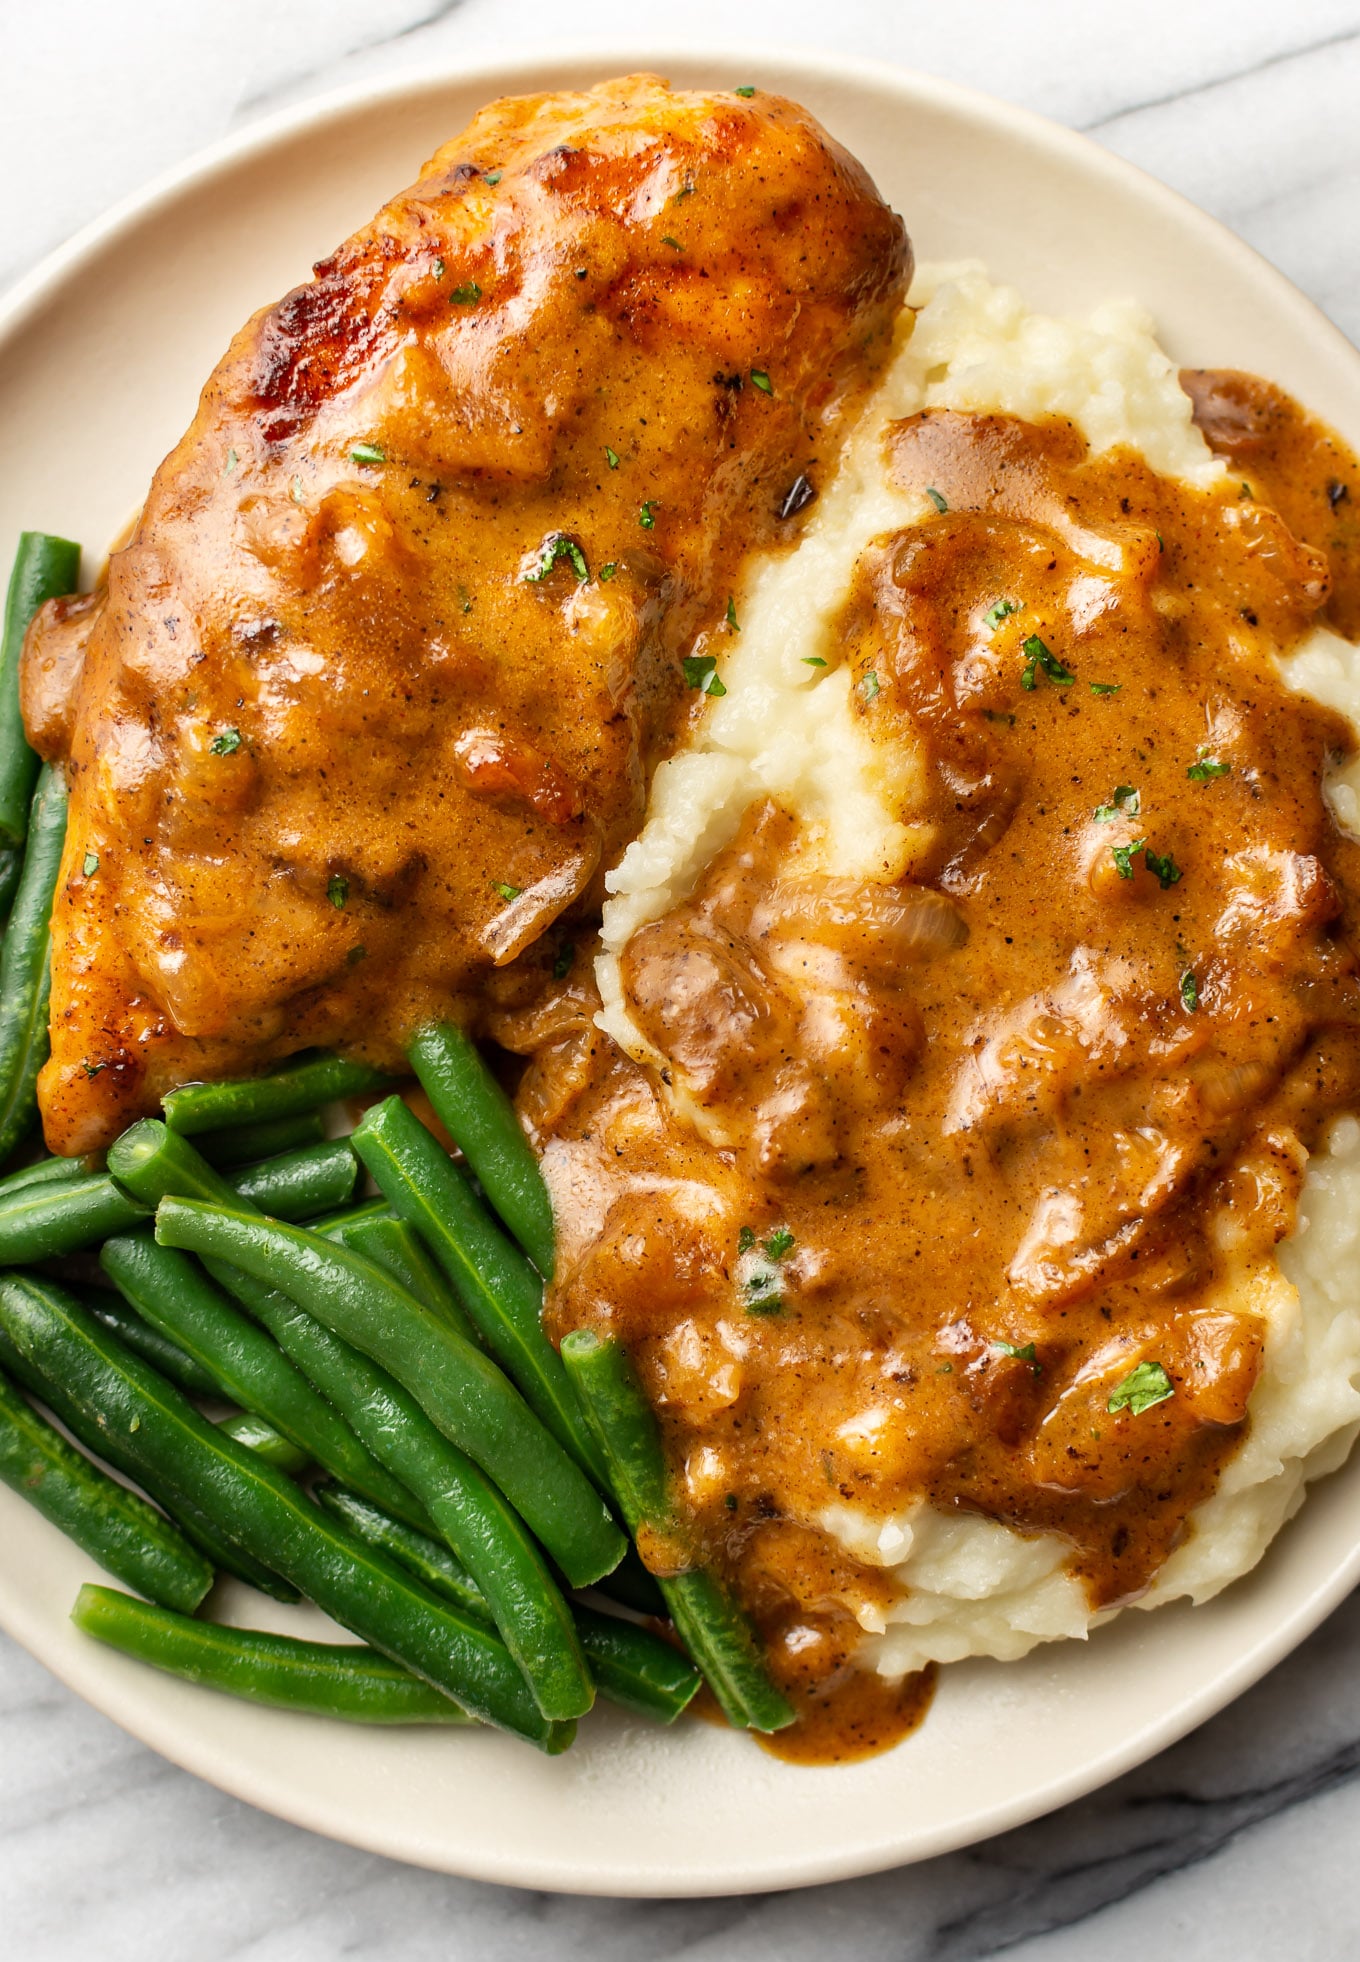 Southern-Style Smothered Chicken